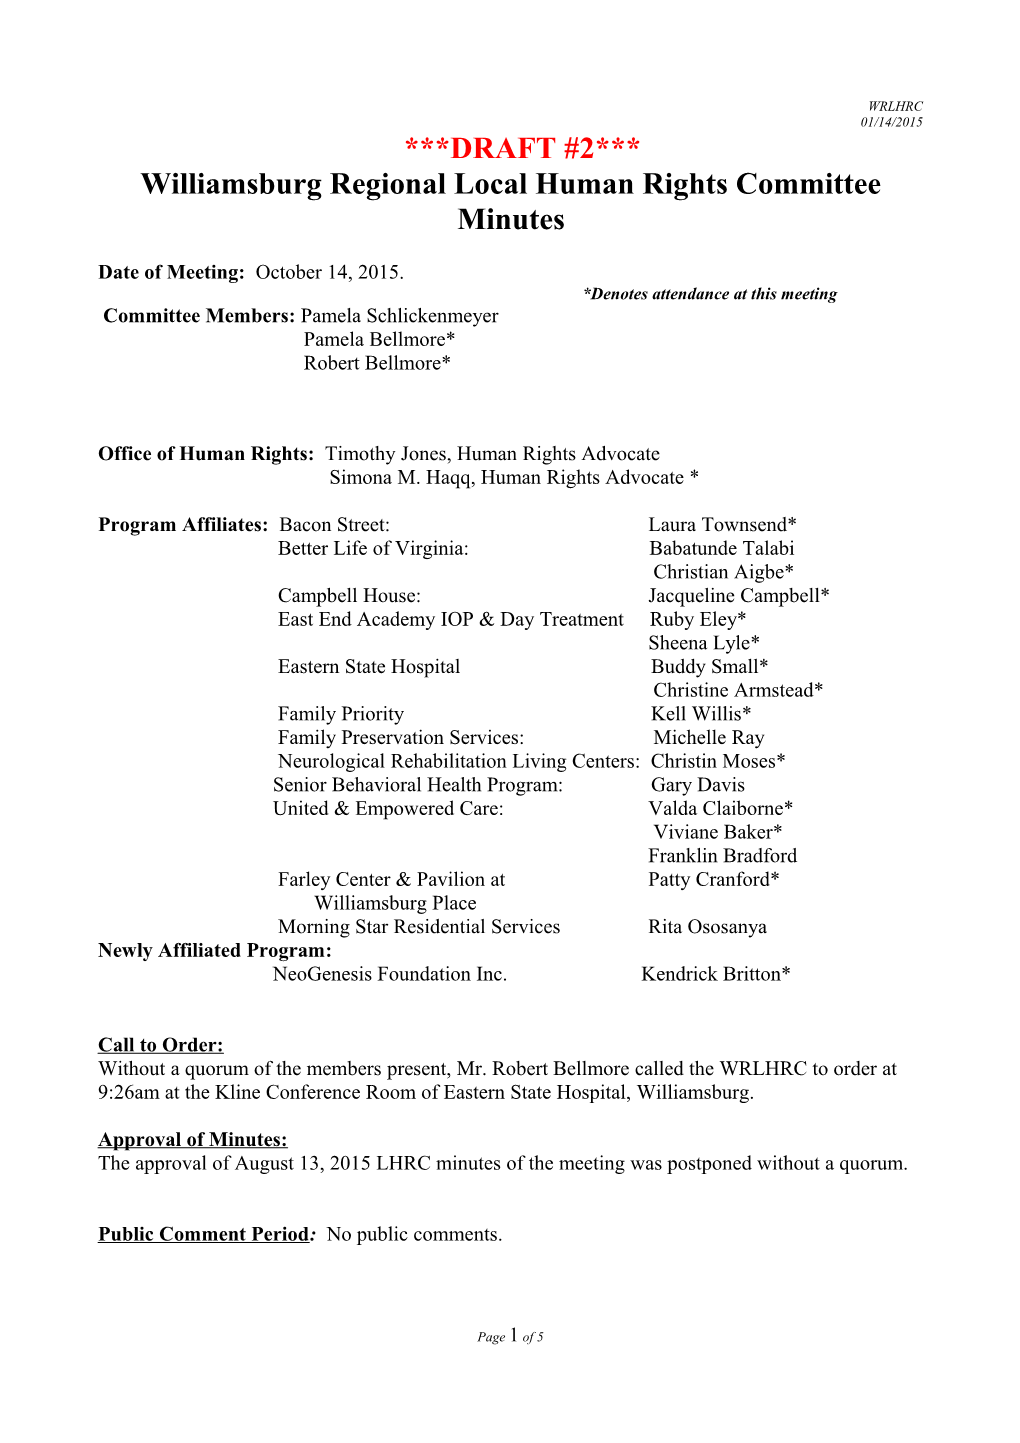 Williamsburg Regional Local Human Rights Committee Minutes